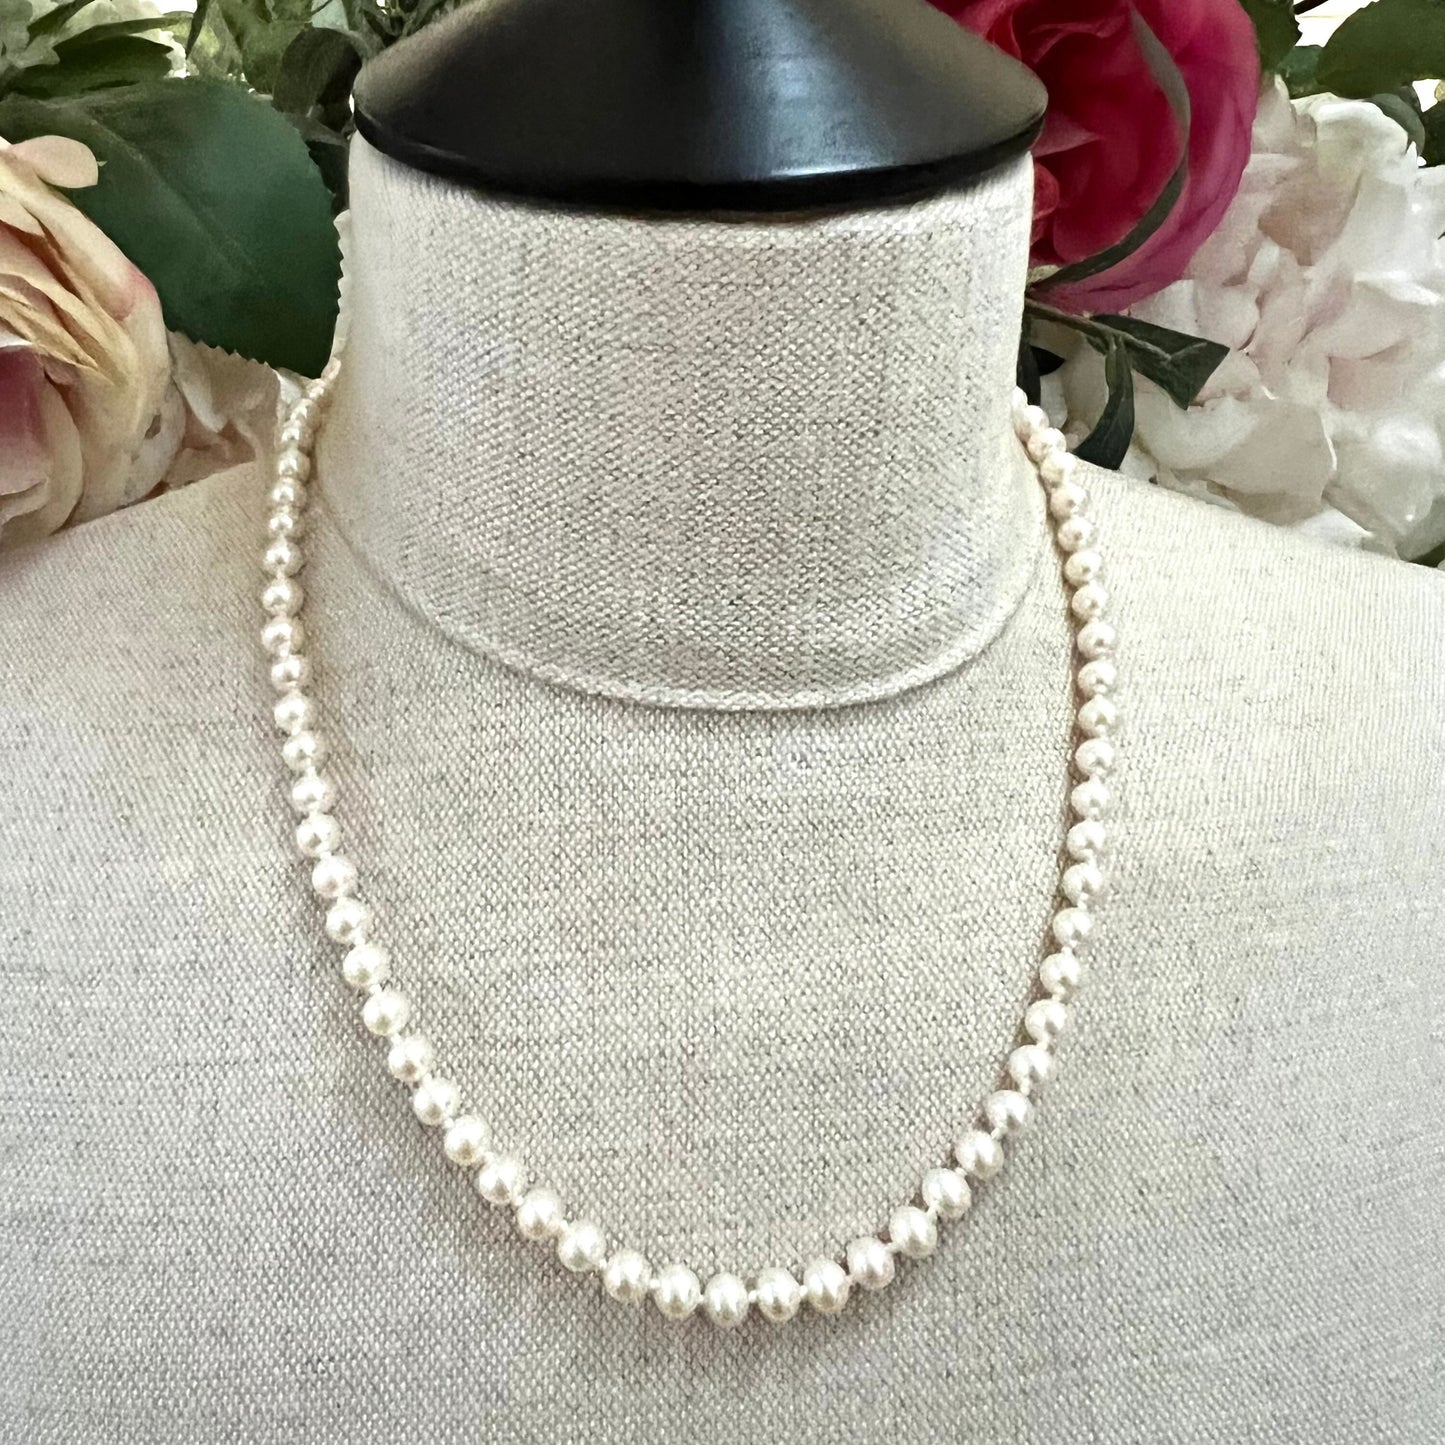 JKa Kohle of Pforzheim 9ct Gold Slide Clasp and Safety Chain Hand Knotted Cultured Pearl Necklace